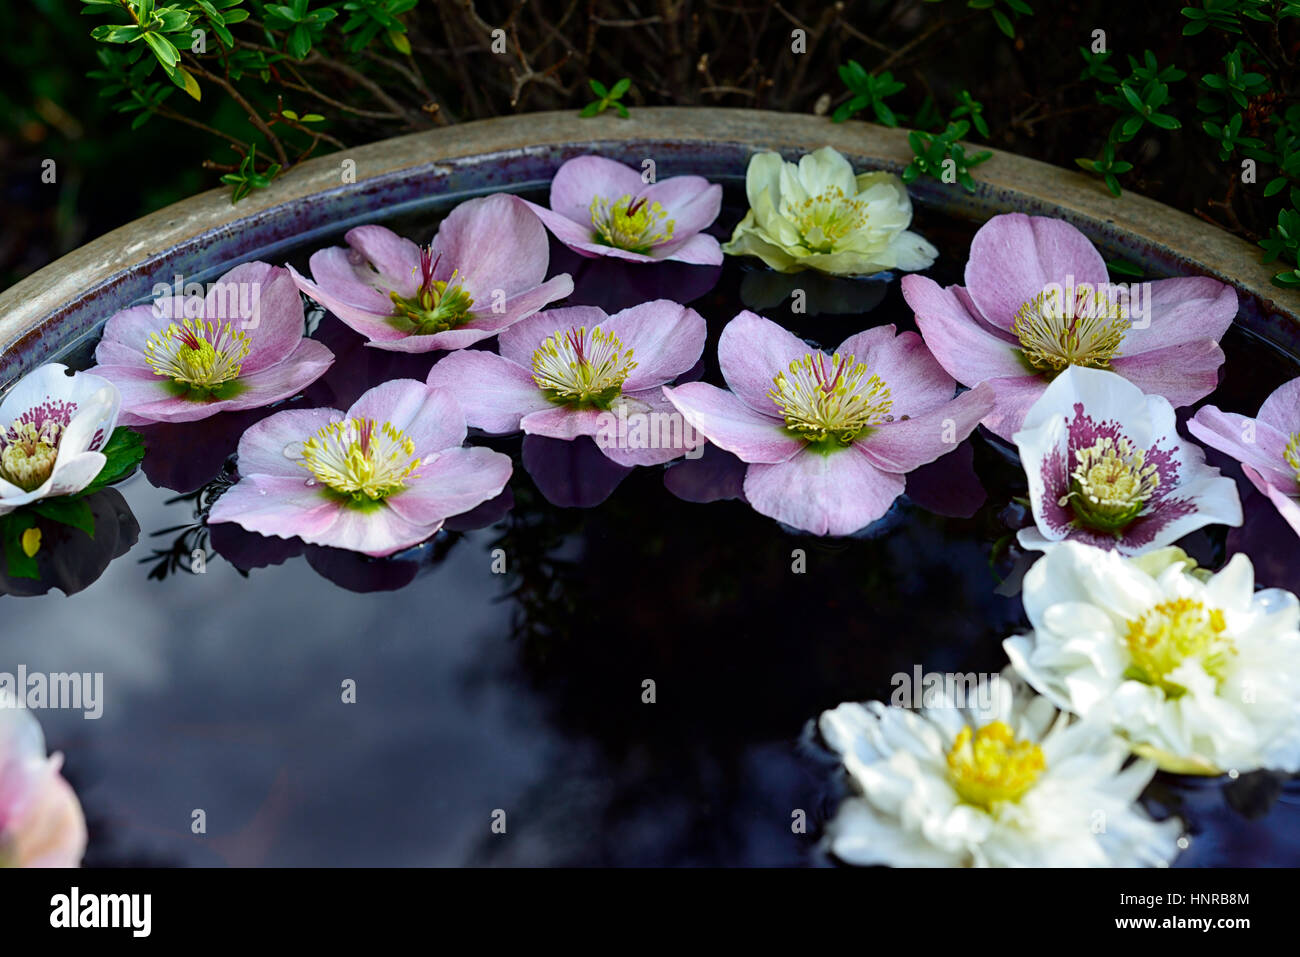 hellebore, hellebores, mix, mixed, flower, flowers, flowering, float, floating, bowl, container, ornamental, water, display, displays, garden, gardeni Stock Photo